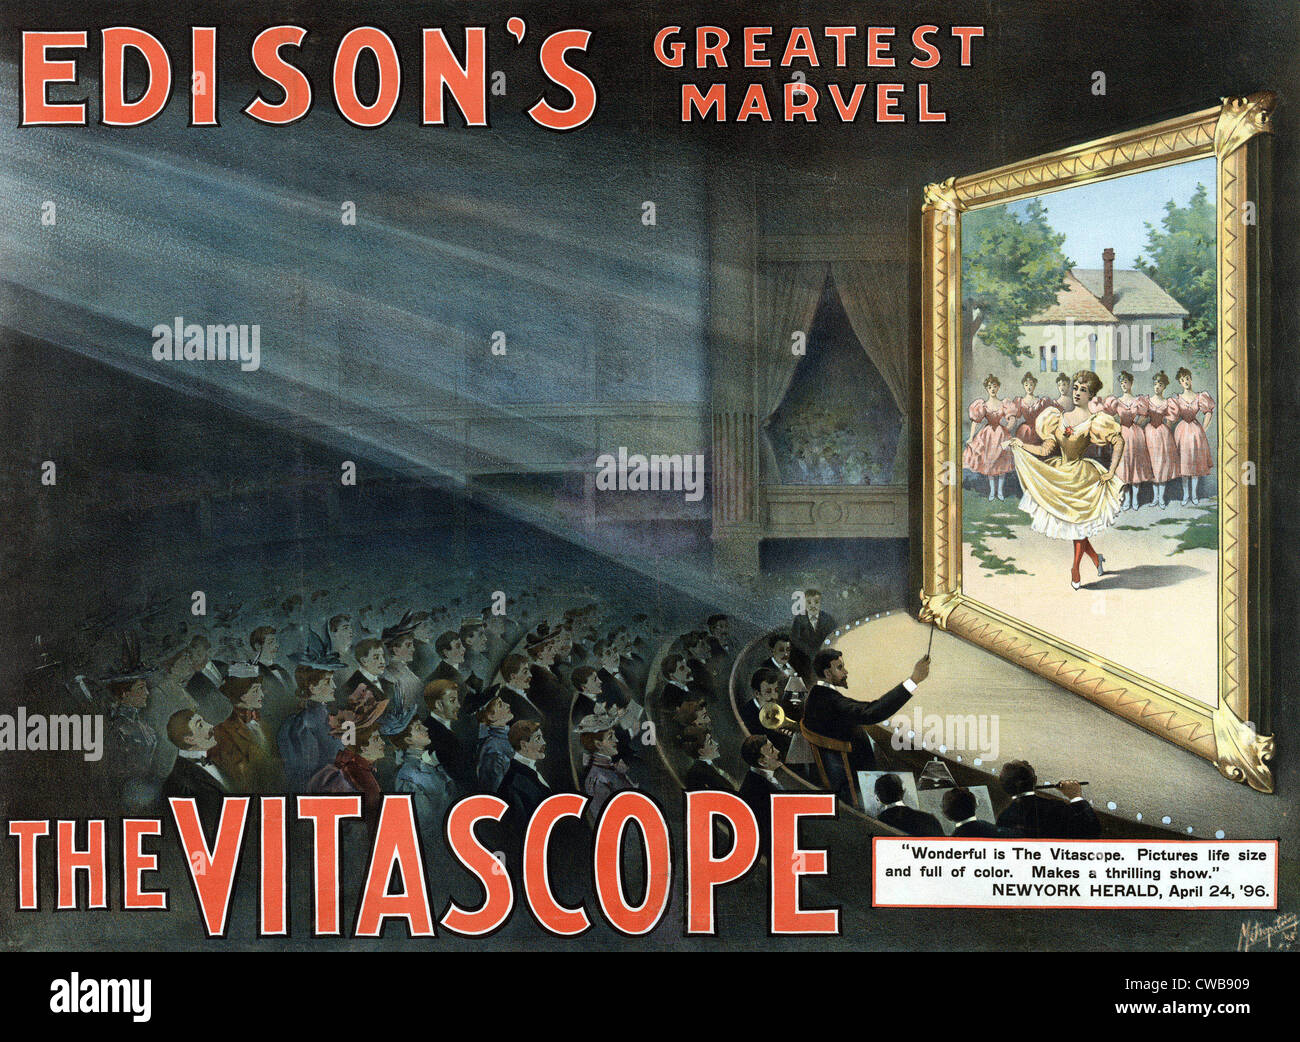 Vitascope, an early motion picture projector, circa 1896. Stock Photo